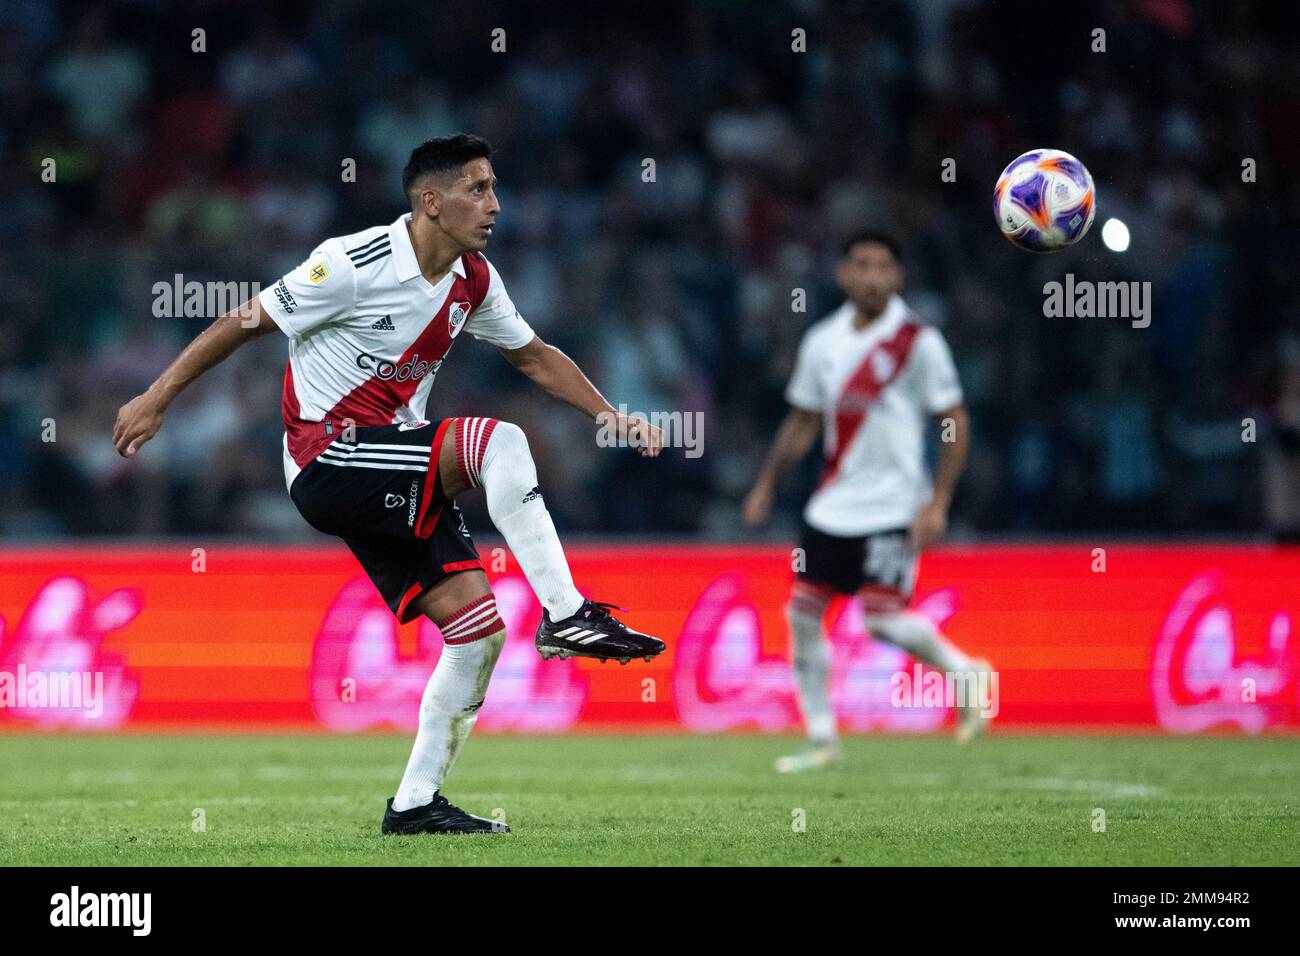 SANTIAGO DEL ESTERO, ARGENTINA, 28 January 2023:   Enzo Perez of River Plate during the Torneo Binance 2023 of Argentine Liga Profesional match between Central Cordoba and River Plate at Stadium Único Madre de Ciudades in Santiago del Estero, Argentina on 28 January 2023. Photo by SFSI Stock Photo